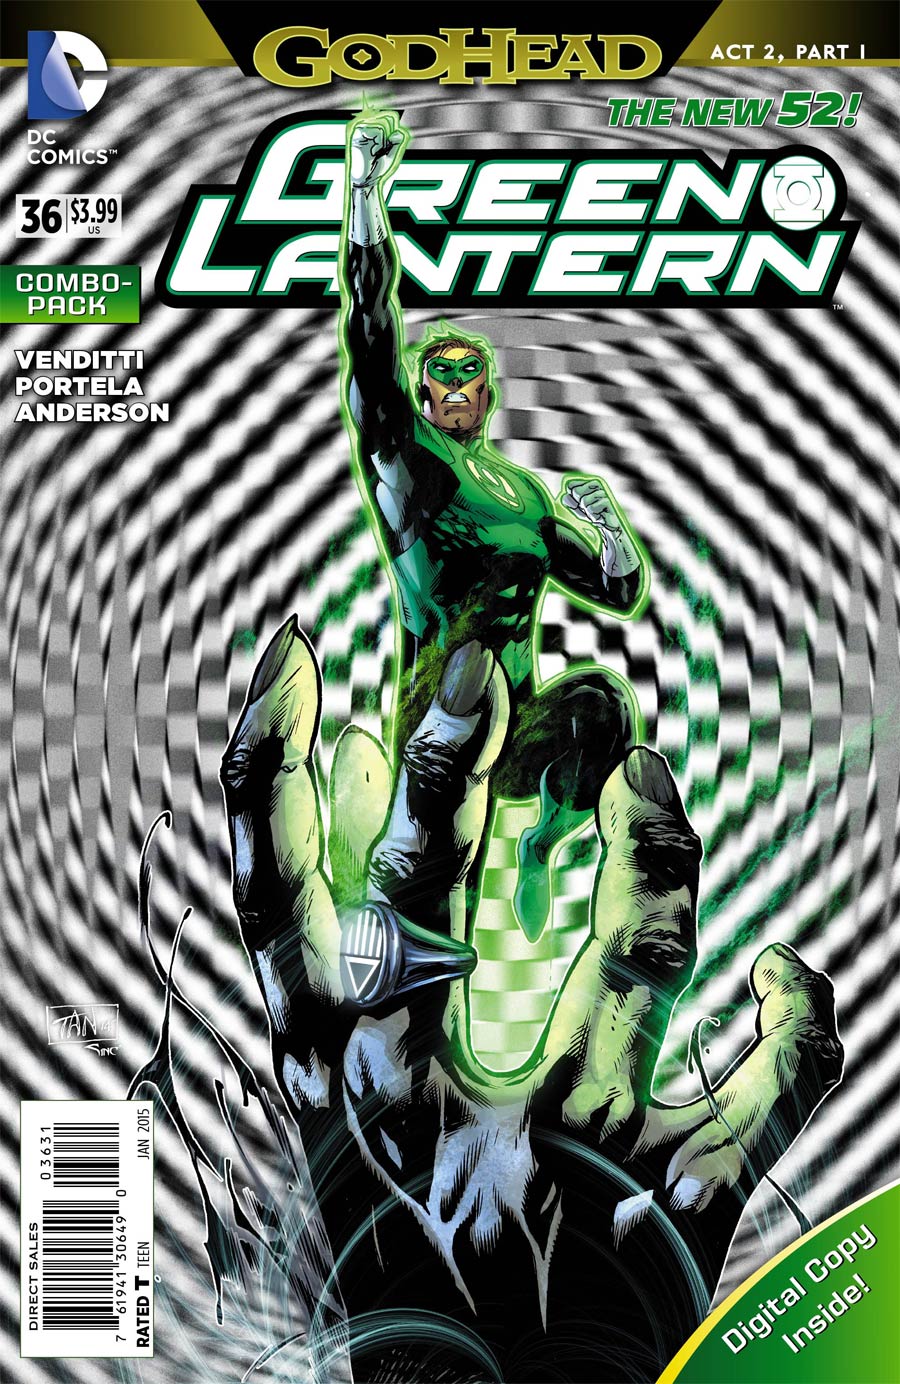 Green Lantern Vol 5 #36 Cover D Combo Pack Without Polybag (Godhead Act 2 Part 1)